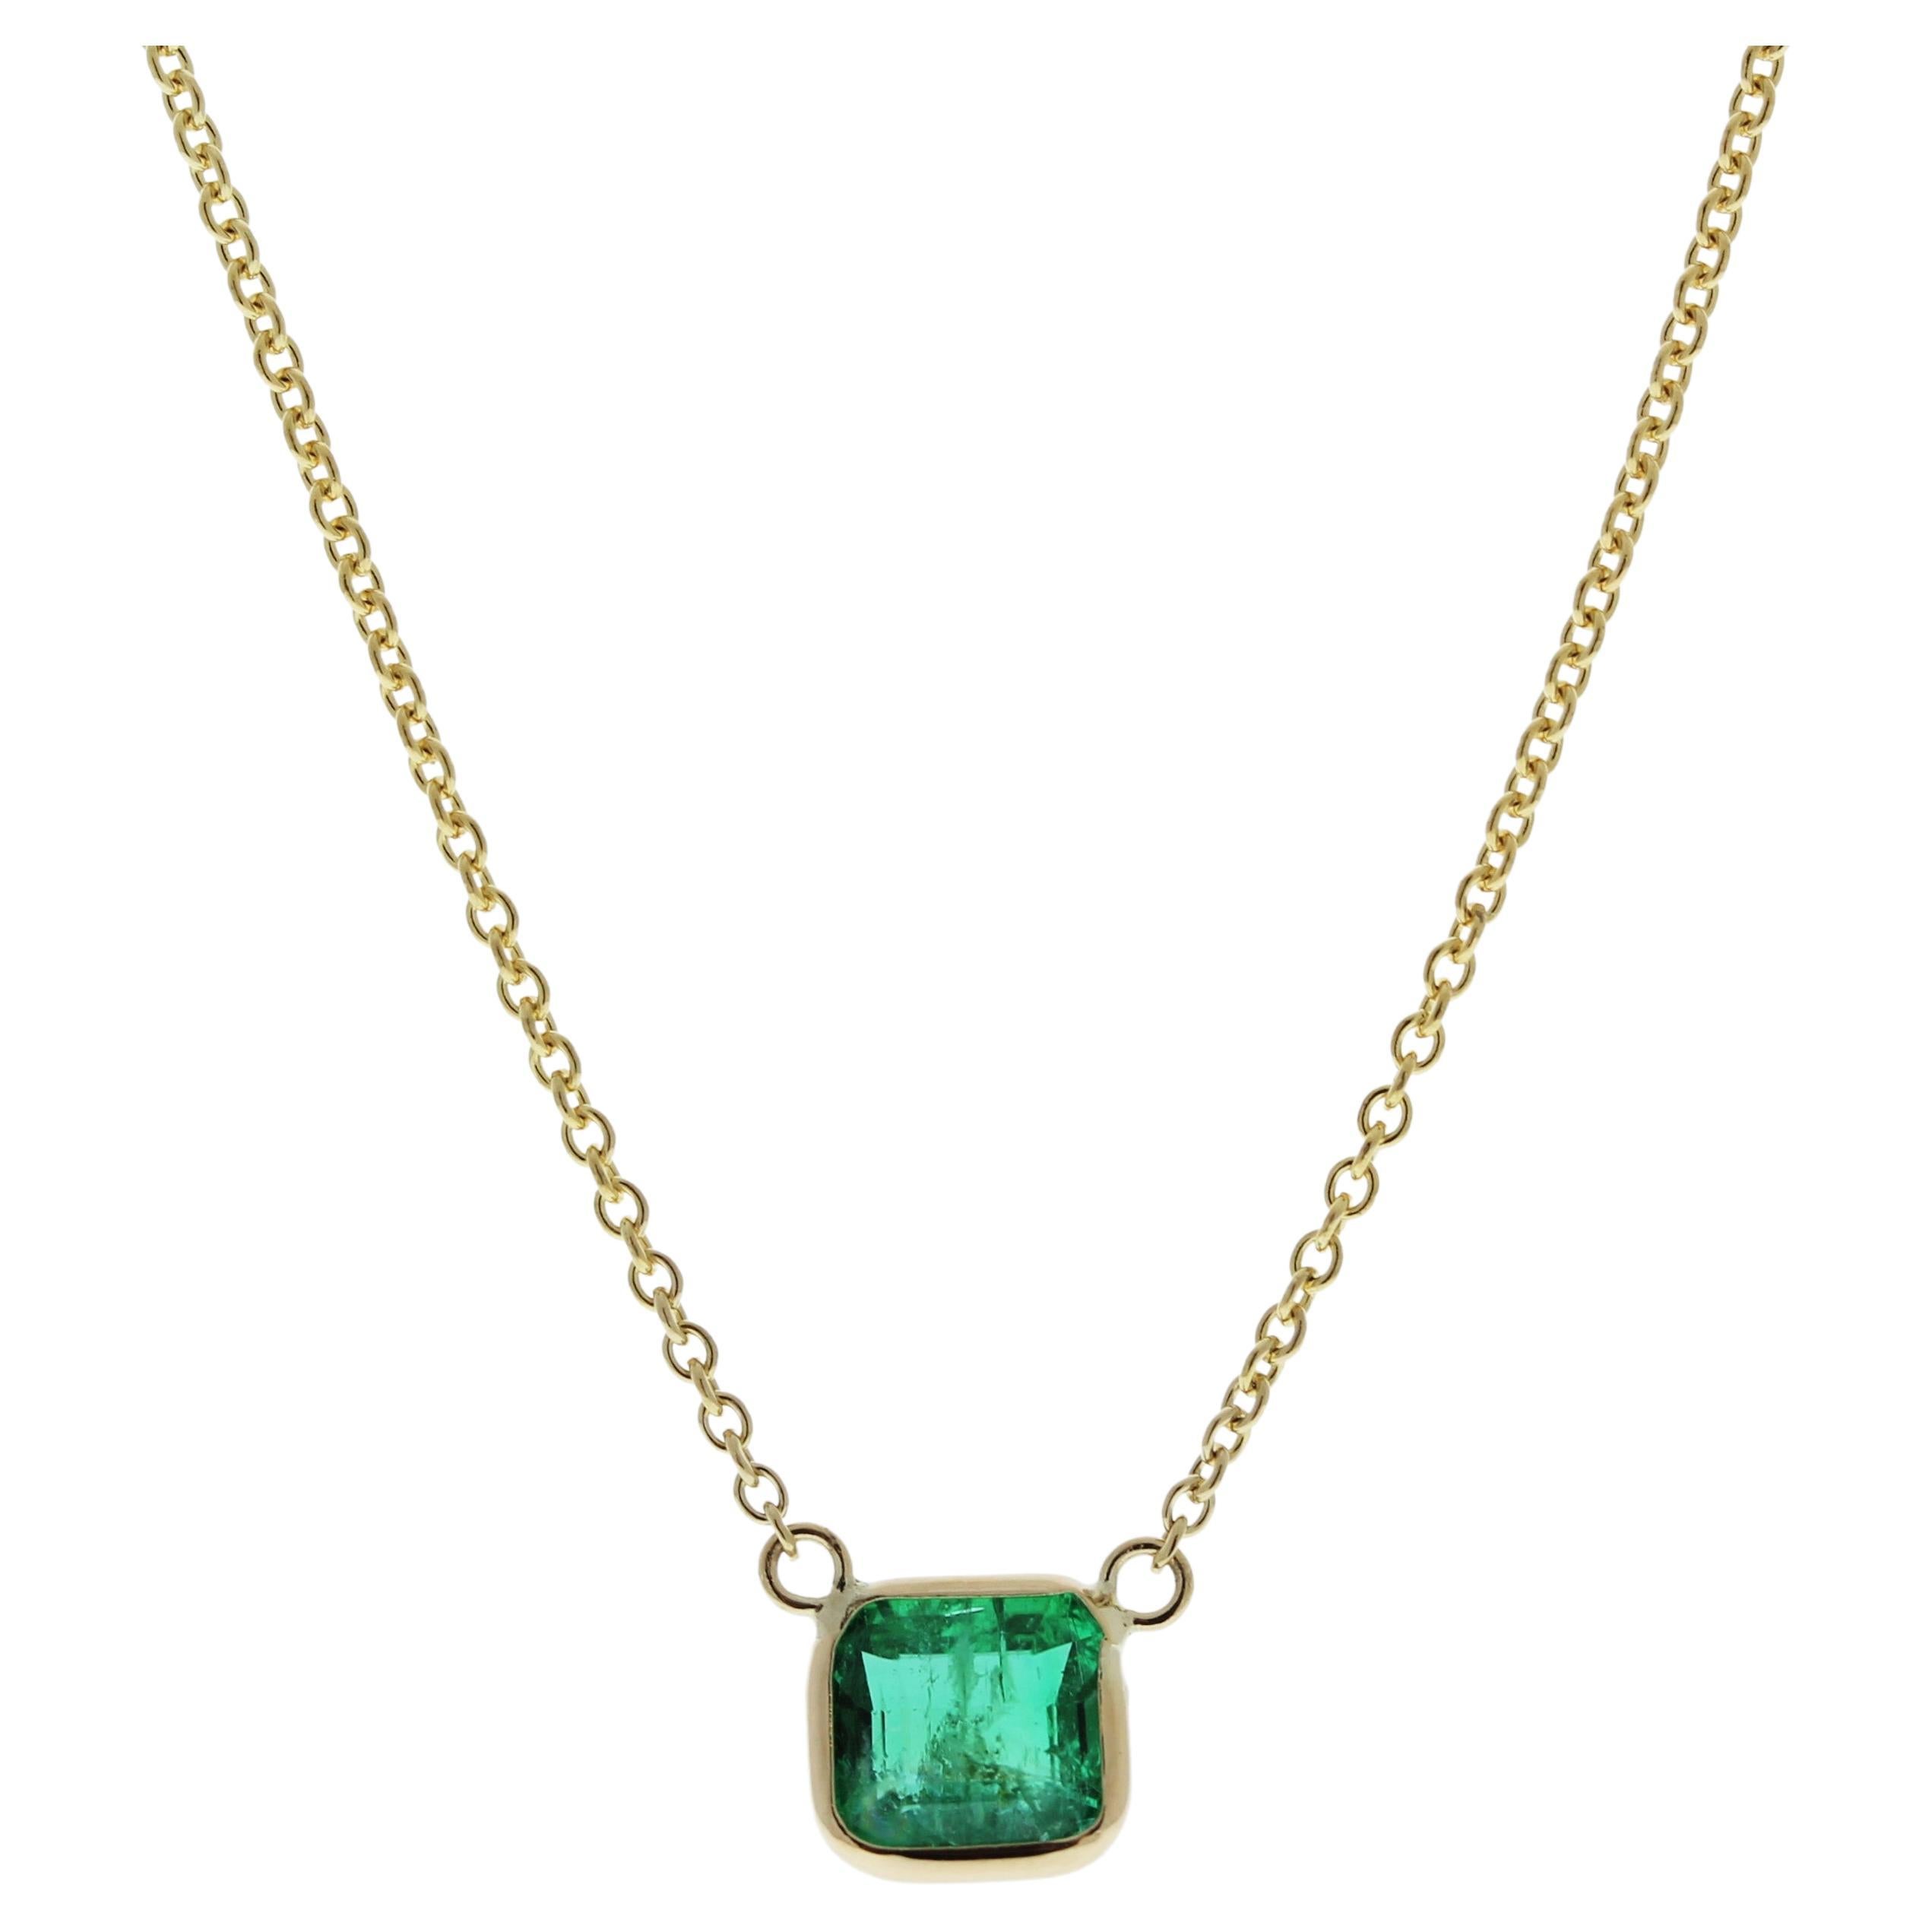 1.04 Carat Asscher Emerald Green Fashion Necklaces In 14k Yellow Gold For Sale